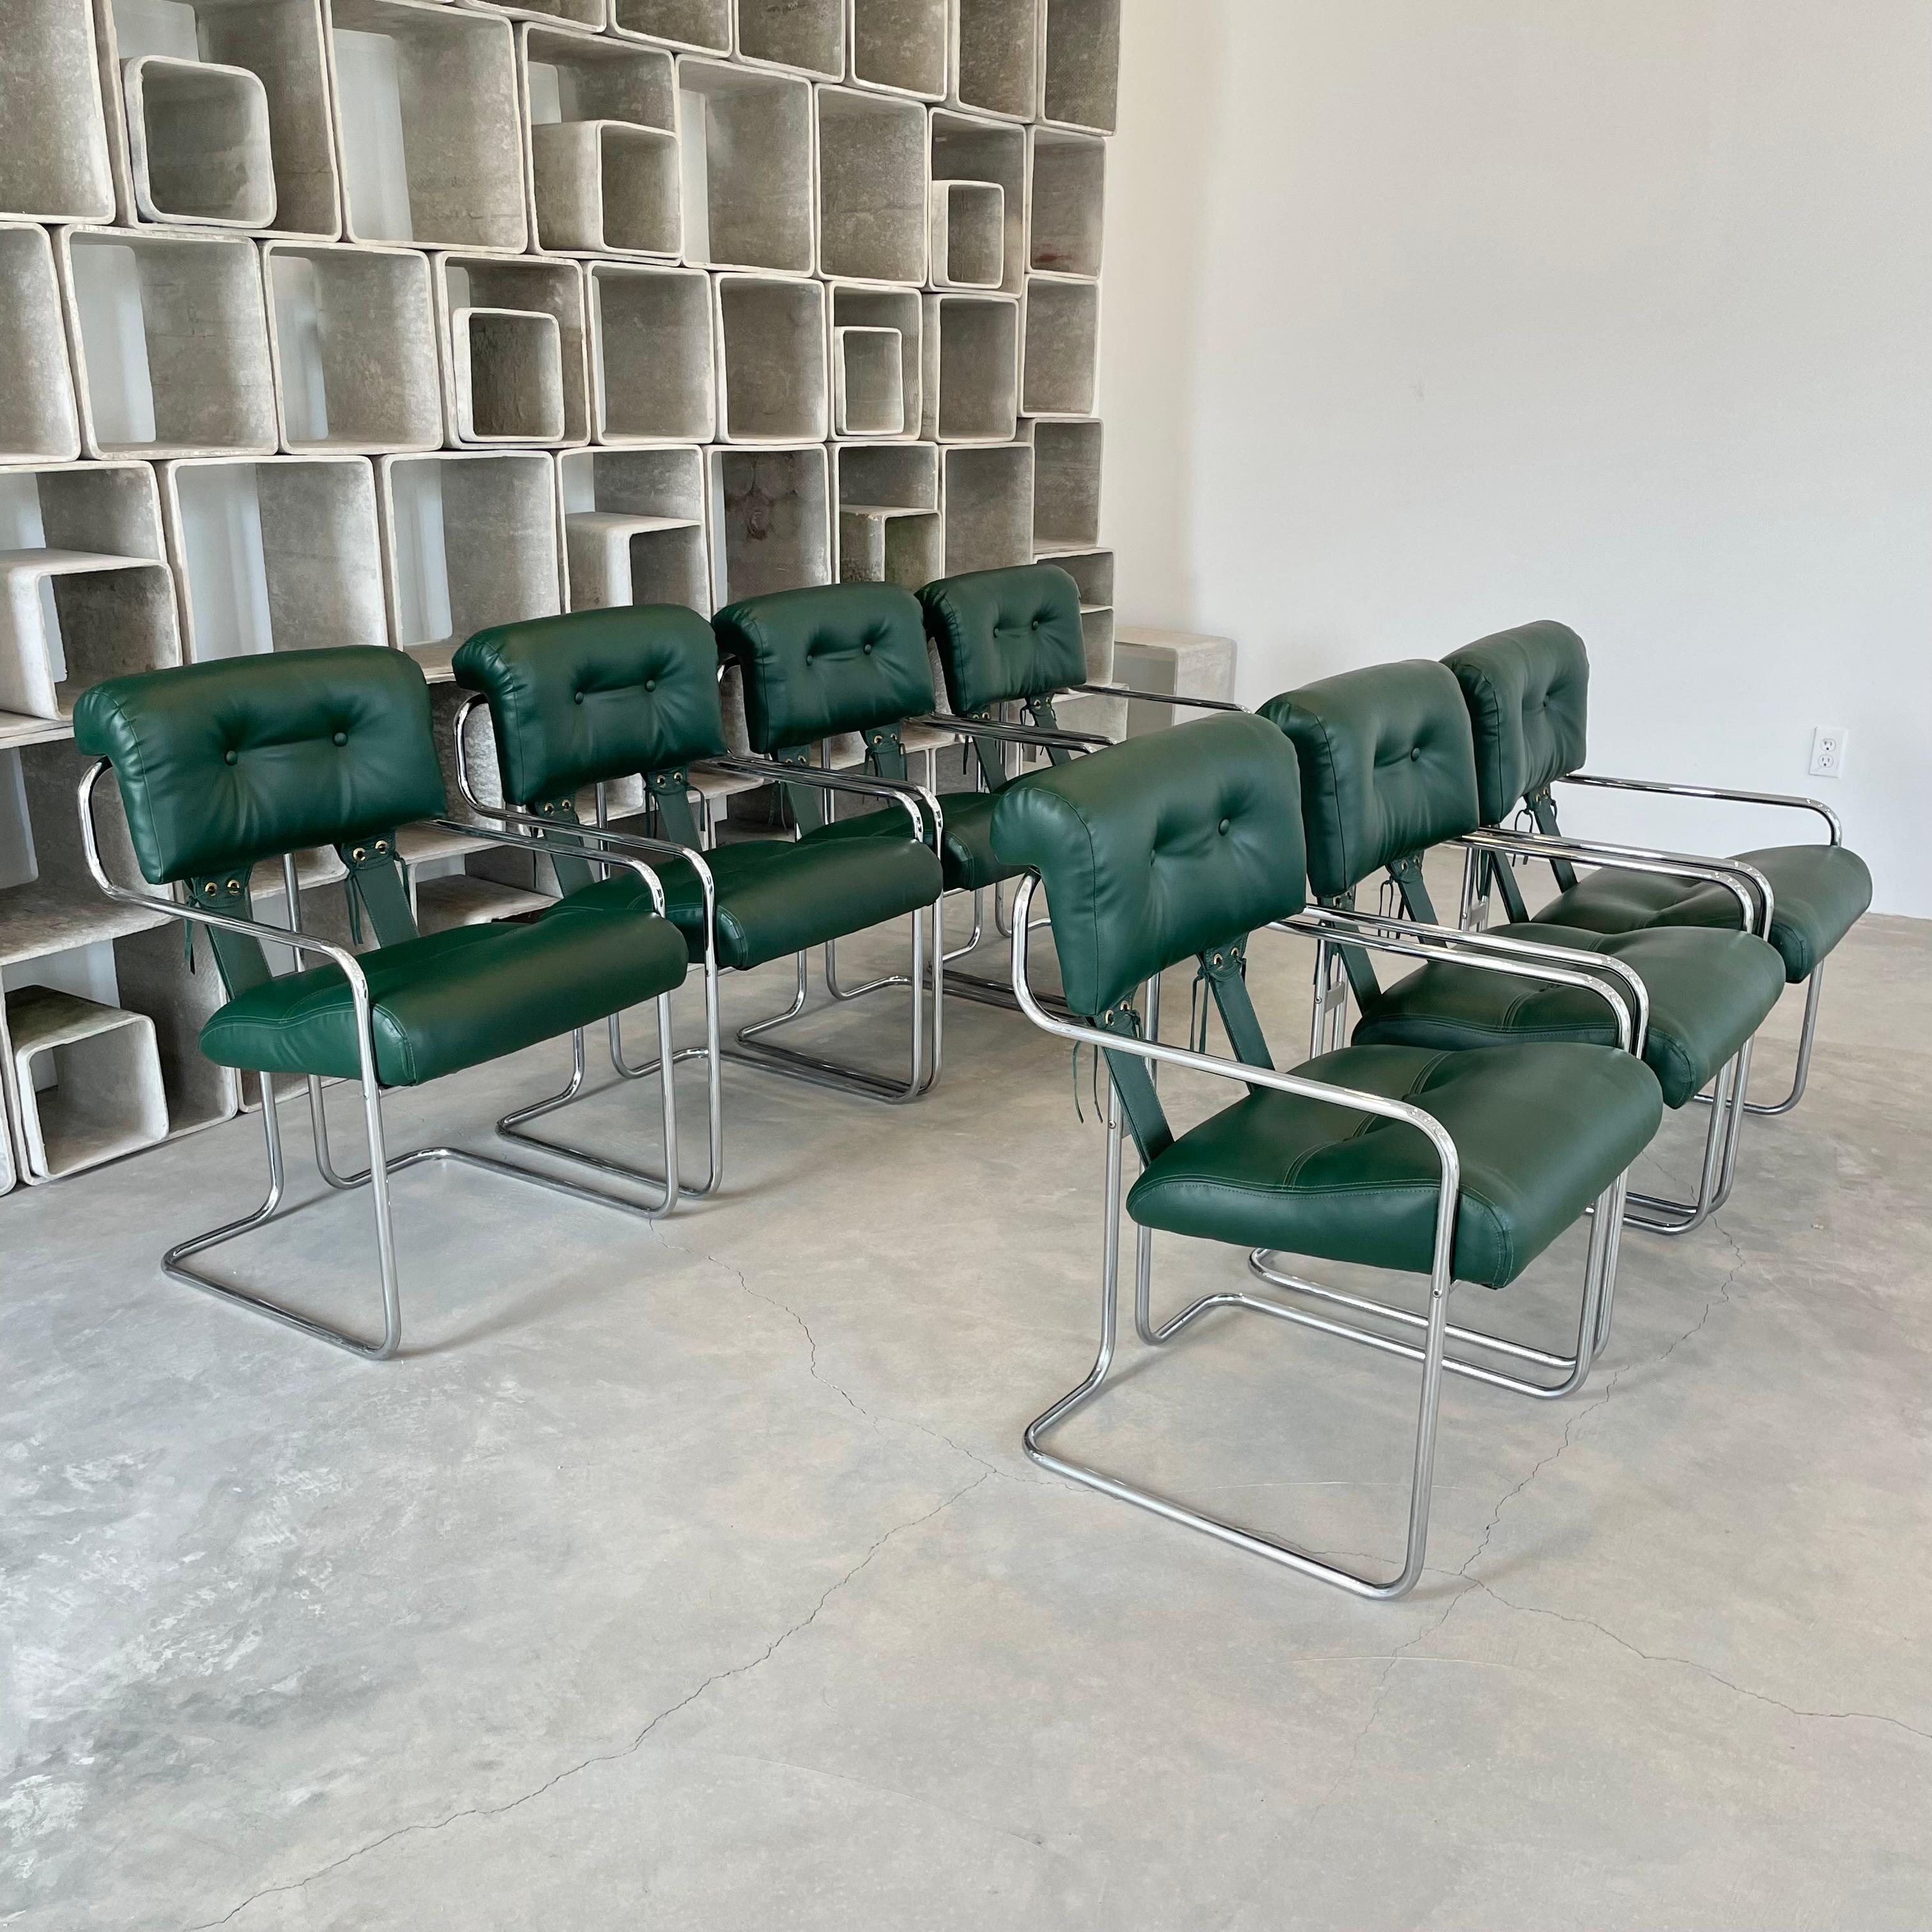 Set of 7 'Tucroma' Chairs in Green by Guido Faleschini, 1970s Italy 6